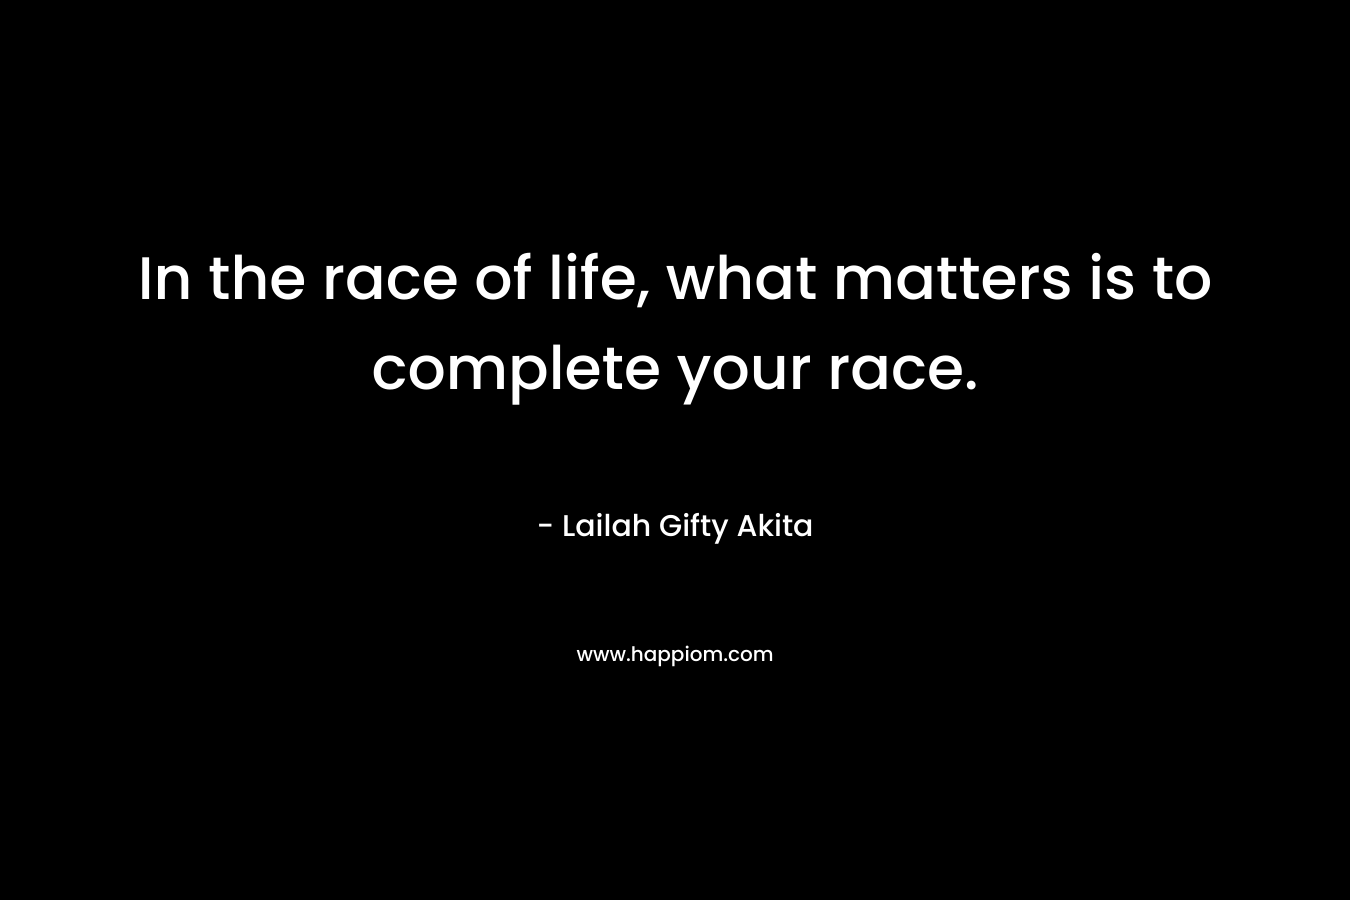 In the race of life, what matters is to complete your race.